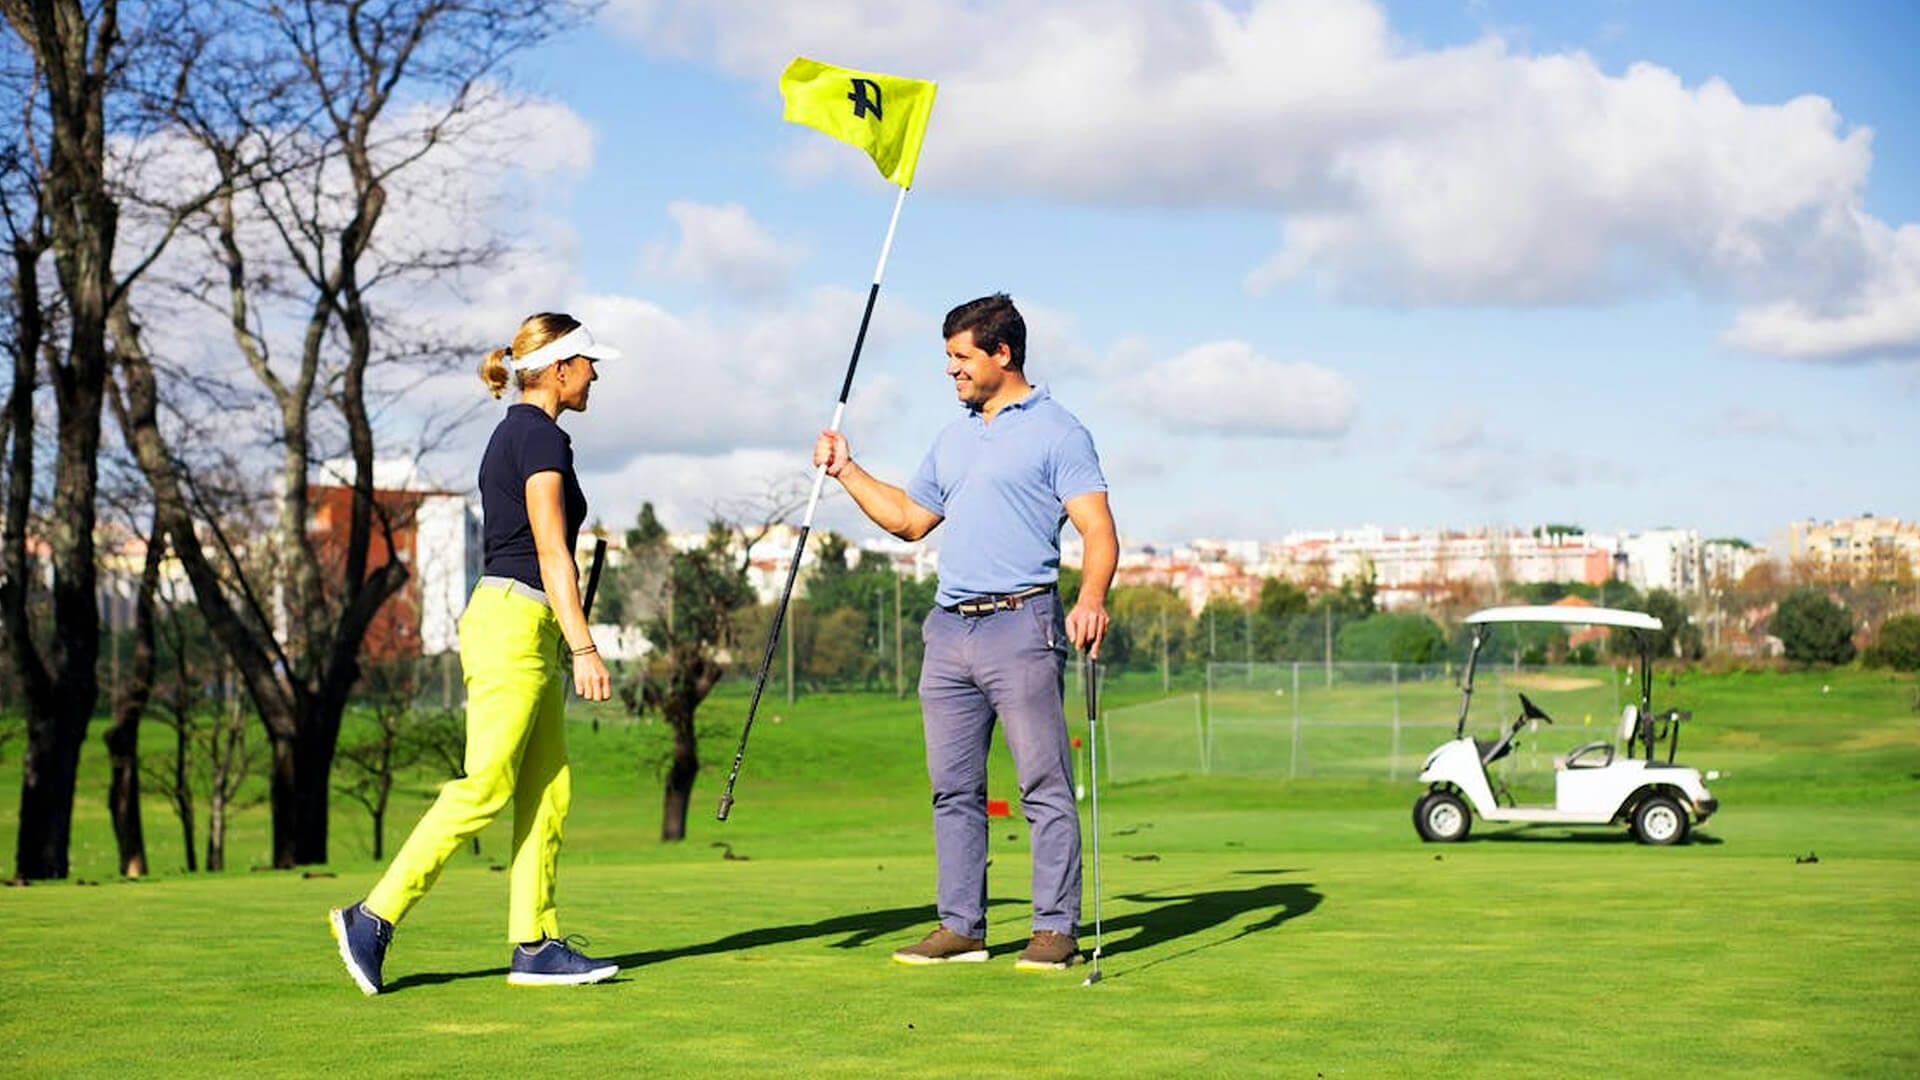 A man and a woman on a golf green. Man is holding the flag.  Golf cart in the background.